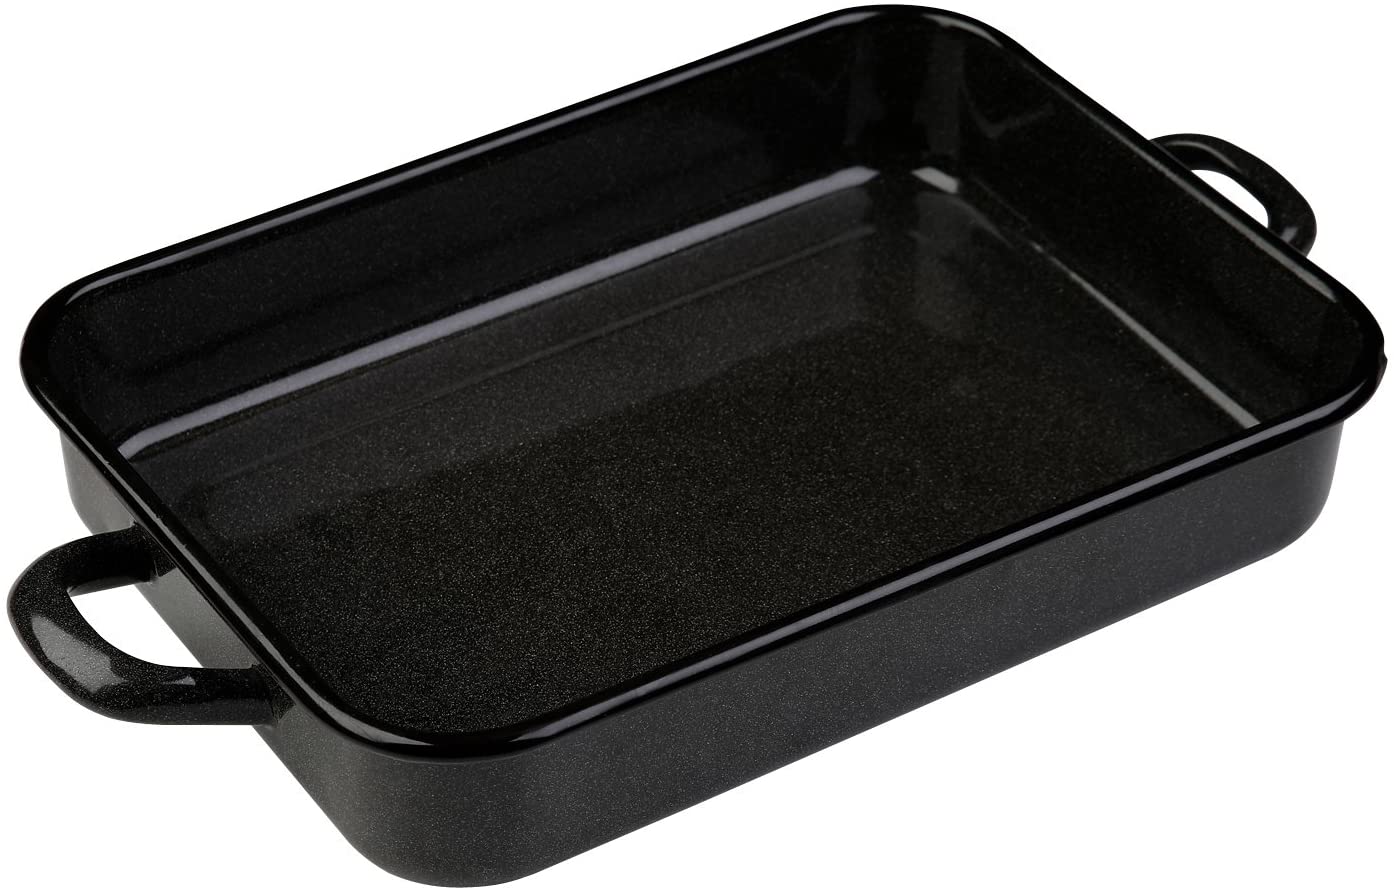 Ingenio von Tefal axentia 130892 Square Pan with Handles Approx. 24 cm Baking and Casserole Dish Steel Black